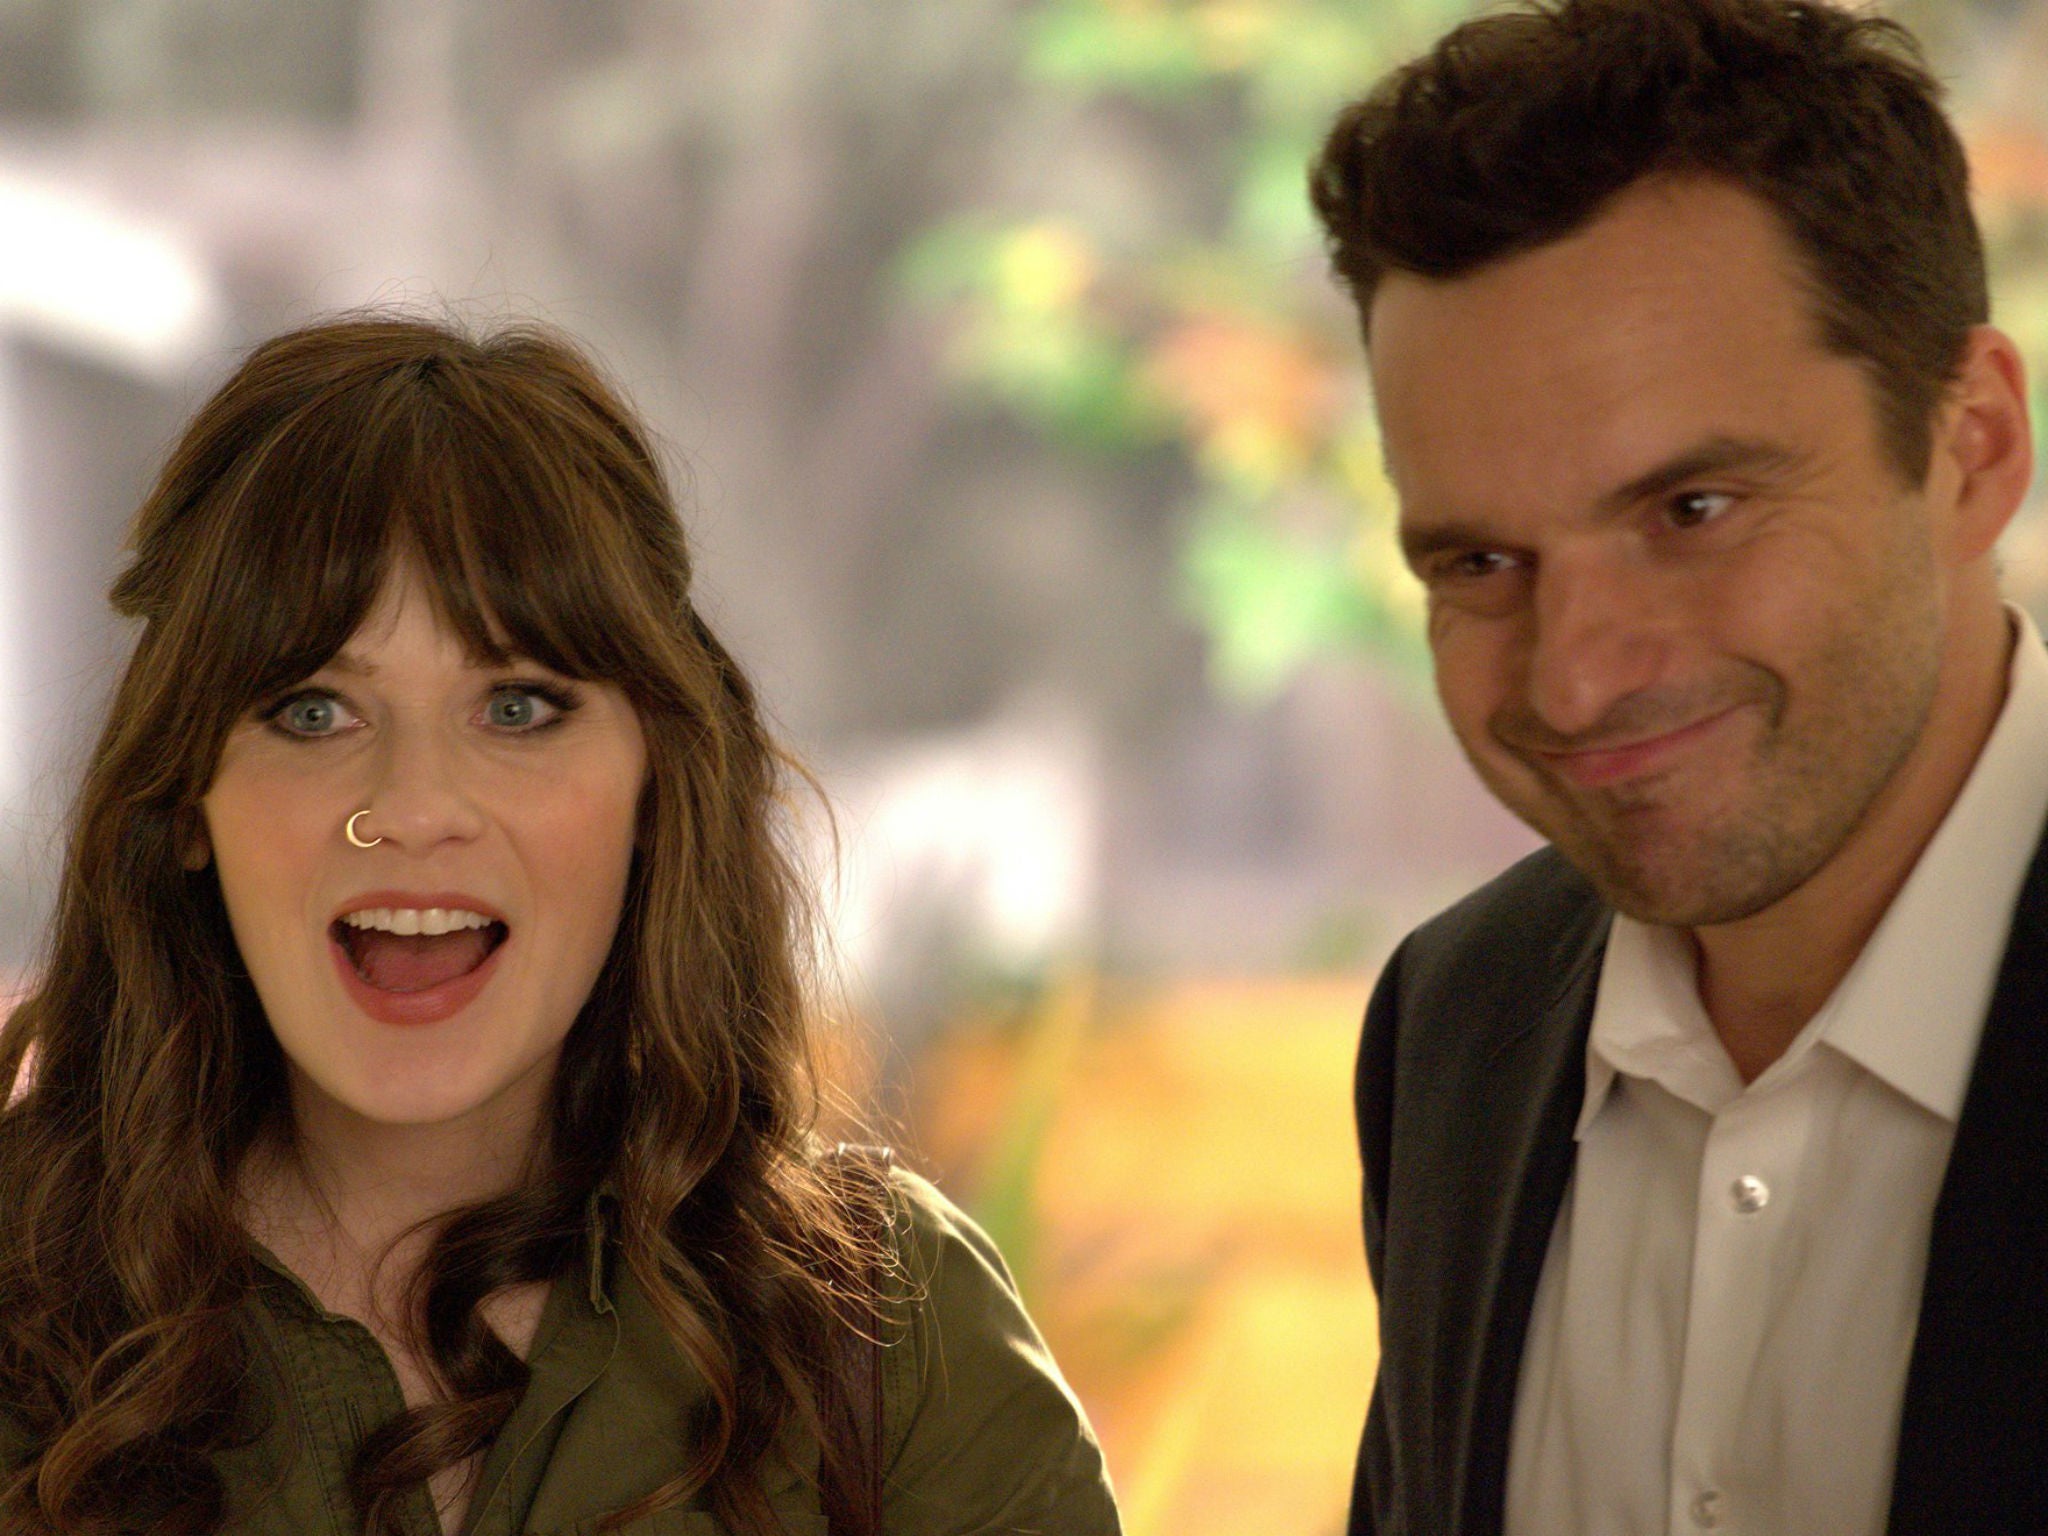 Zooey Deschanel and Jake Johnson in the Season 7 premiere of New Girl